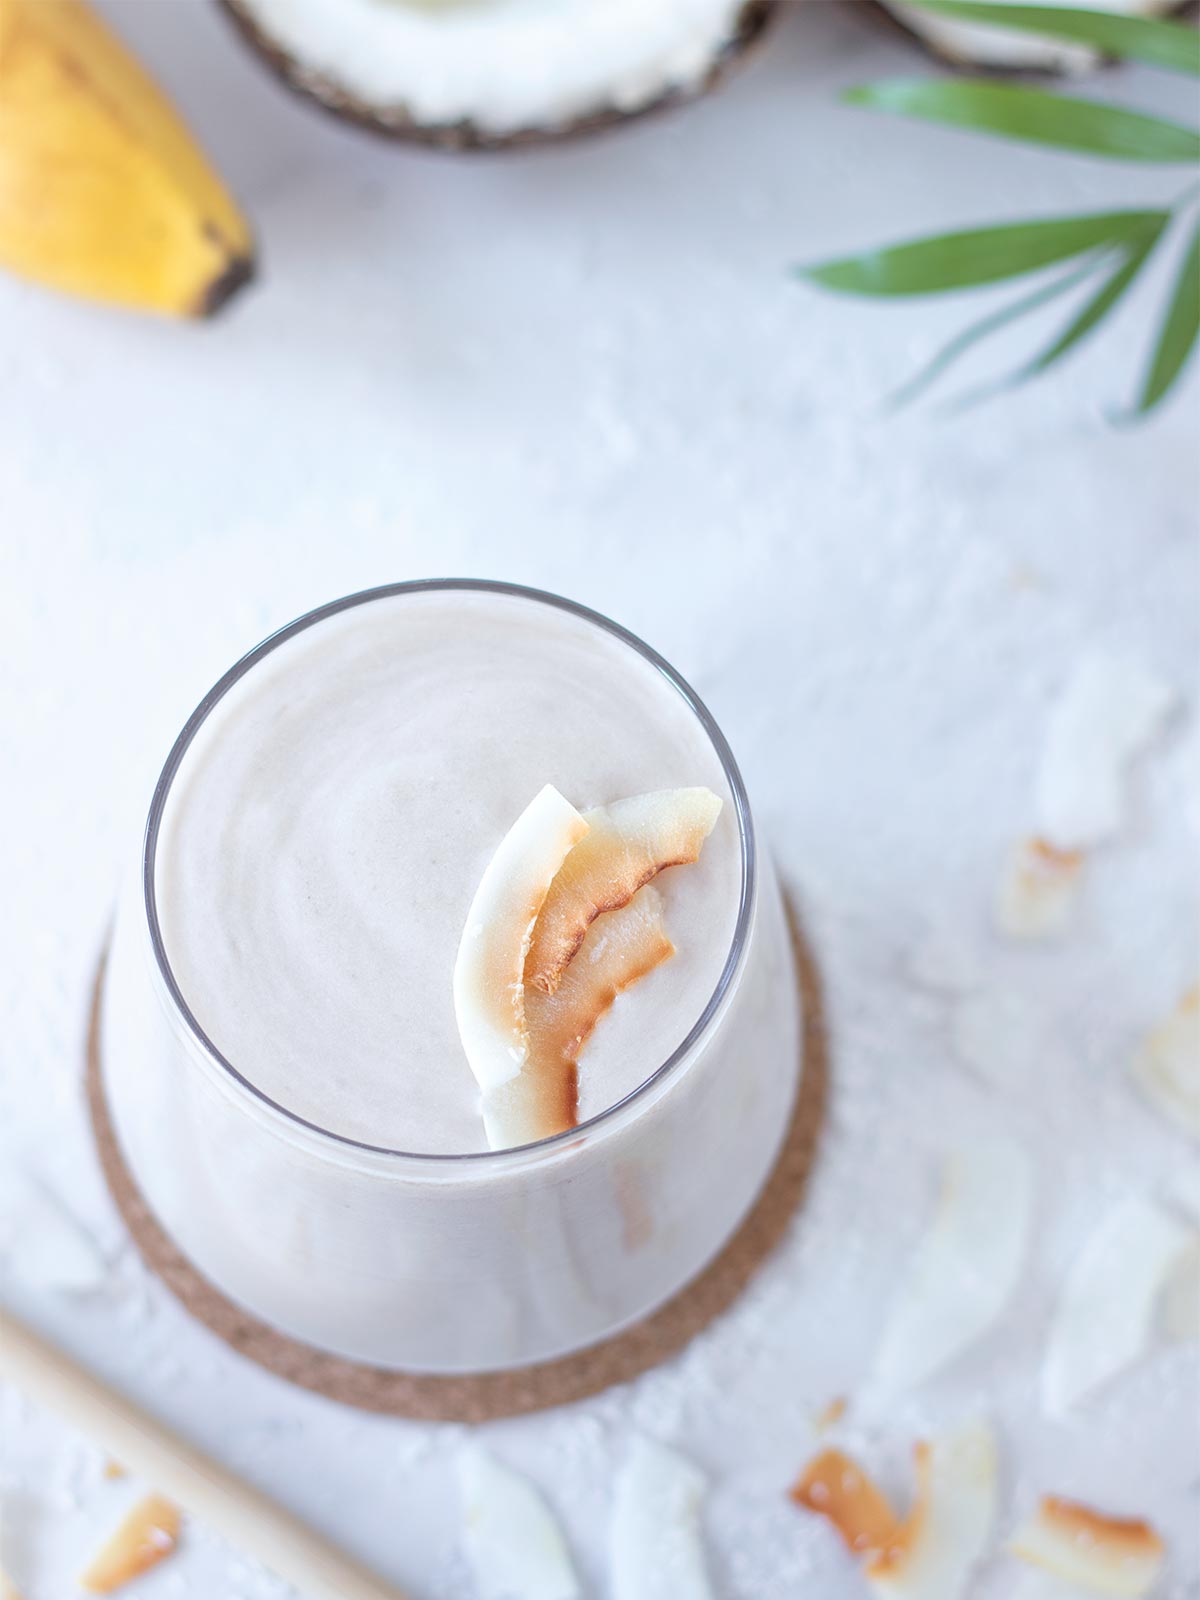 Coconut shake without ice cream topped with toasted coconut flakes.